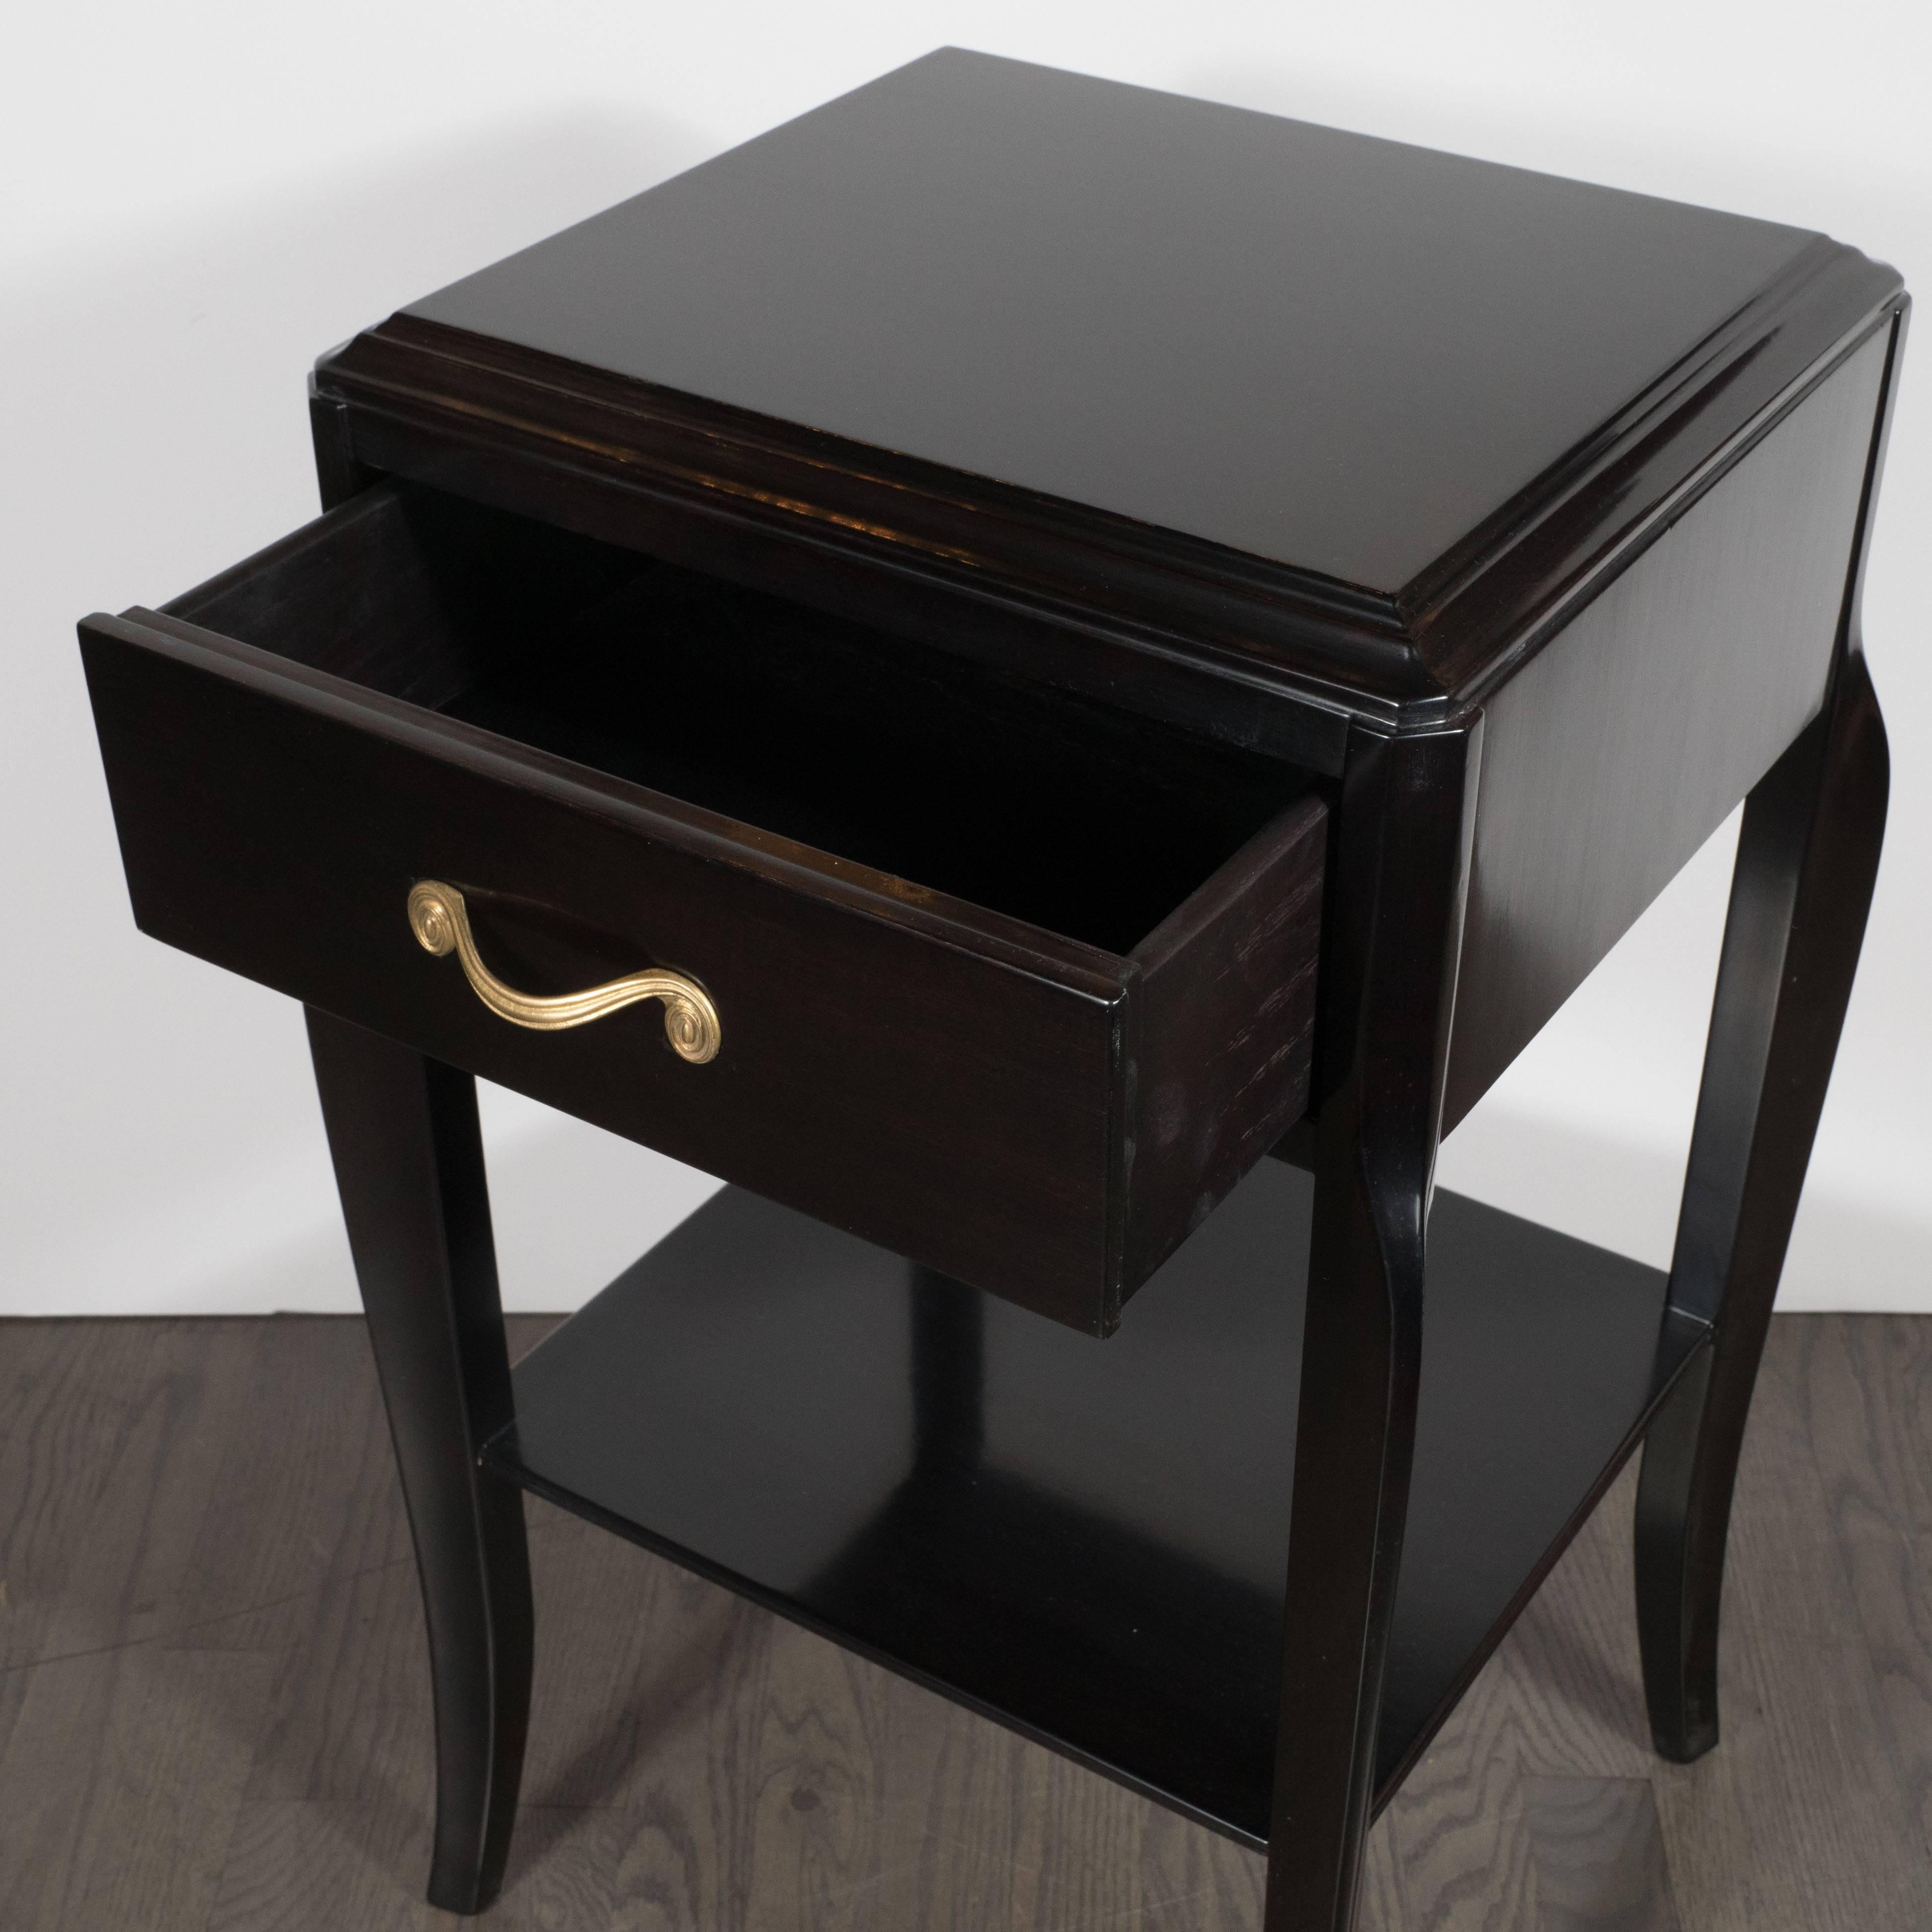 Gilt Pair of Grosfeld House Nightstands in Ebonized Mahogany with Gilded Scroll Pulls